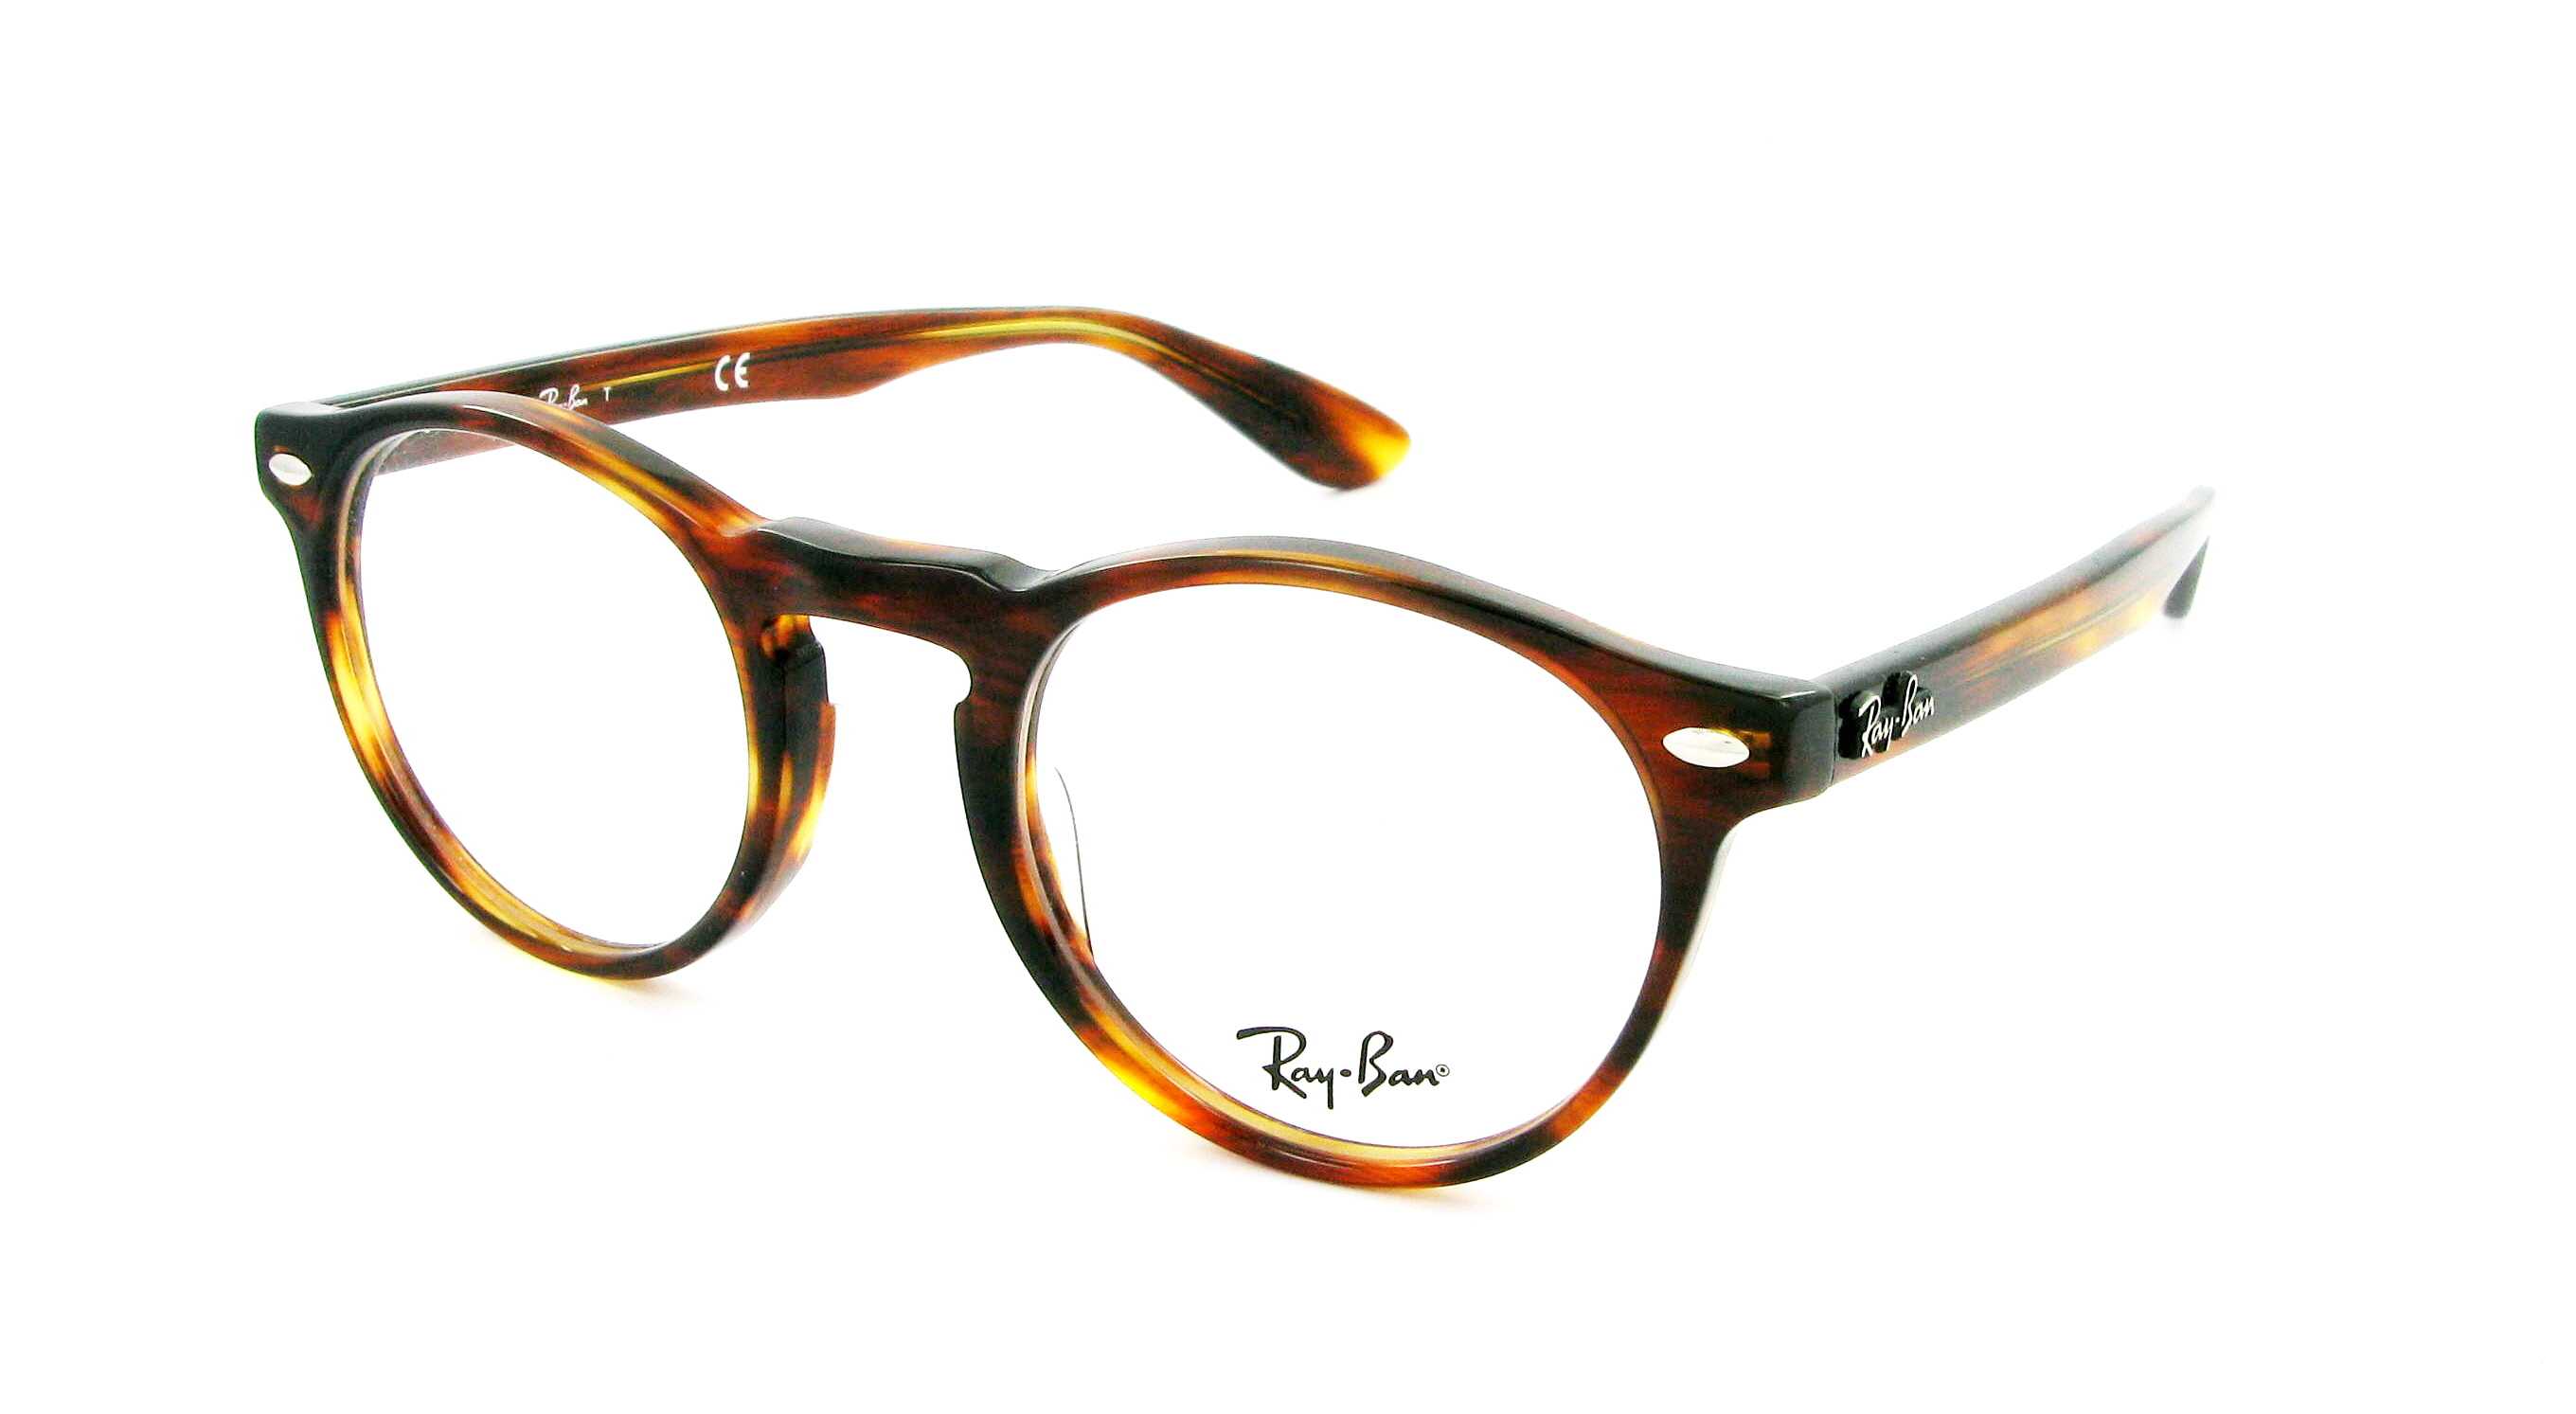 lunette lumiere bleue homme ray ban